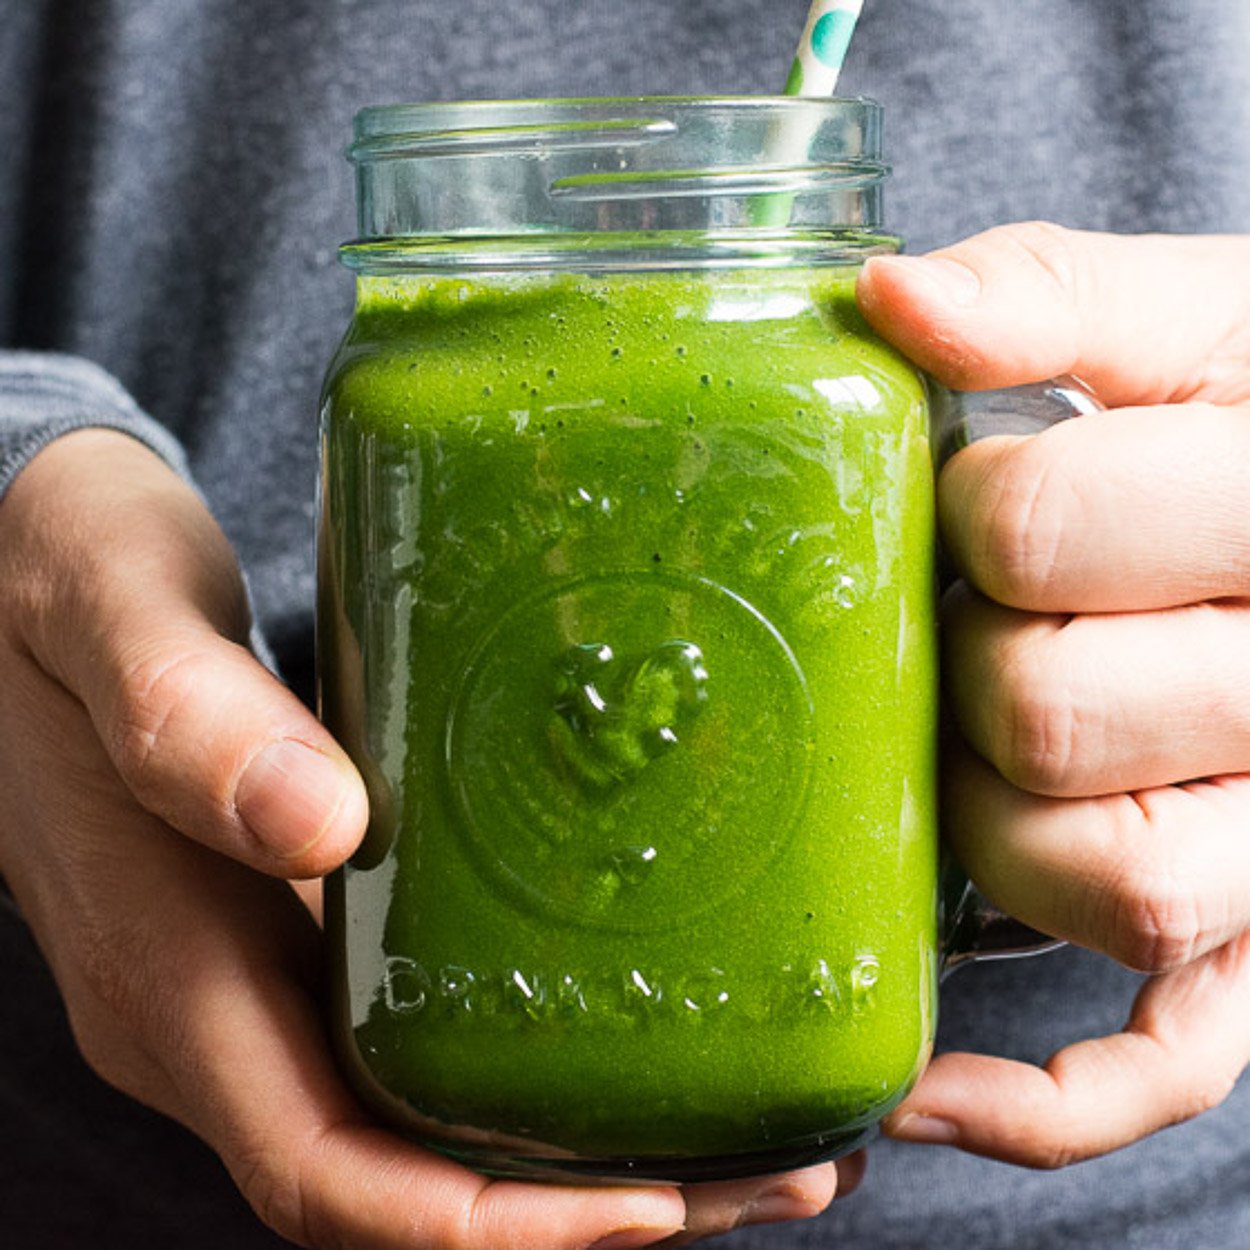 https://ifoodreal.com/wp-content/uploads/2021/11/fg-Green-Smoothie-recipe-3.jpg